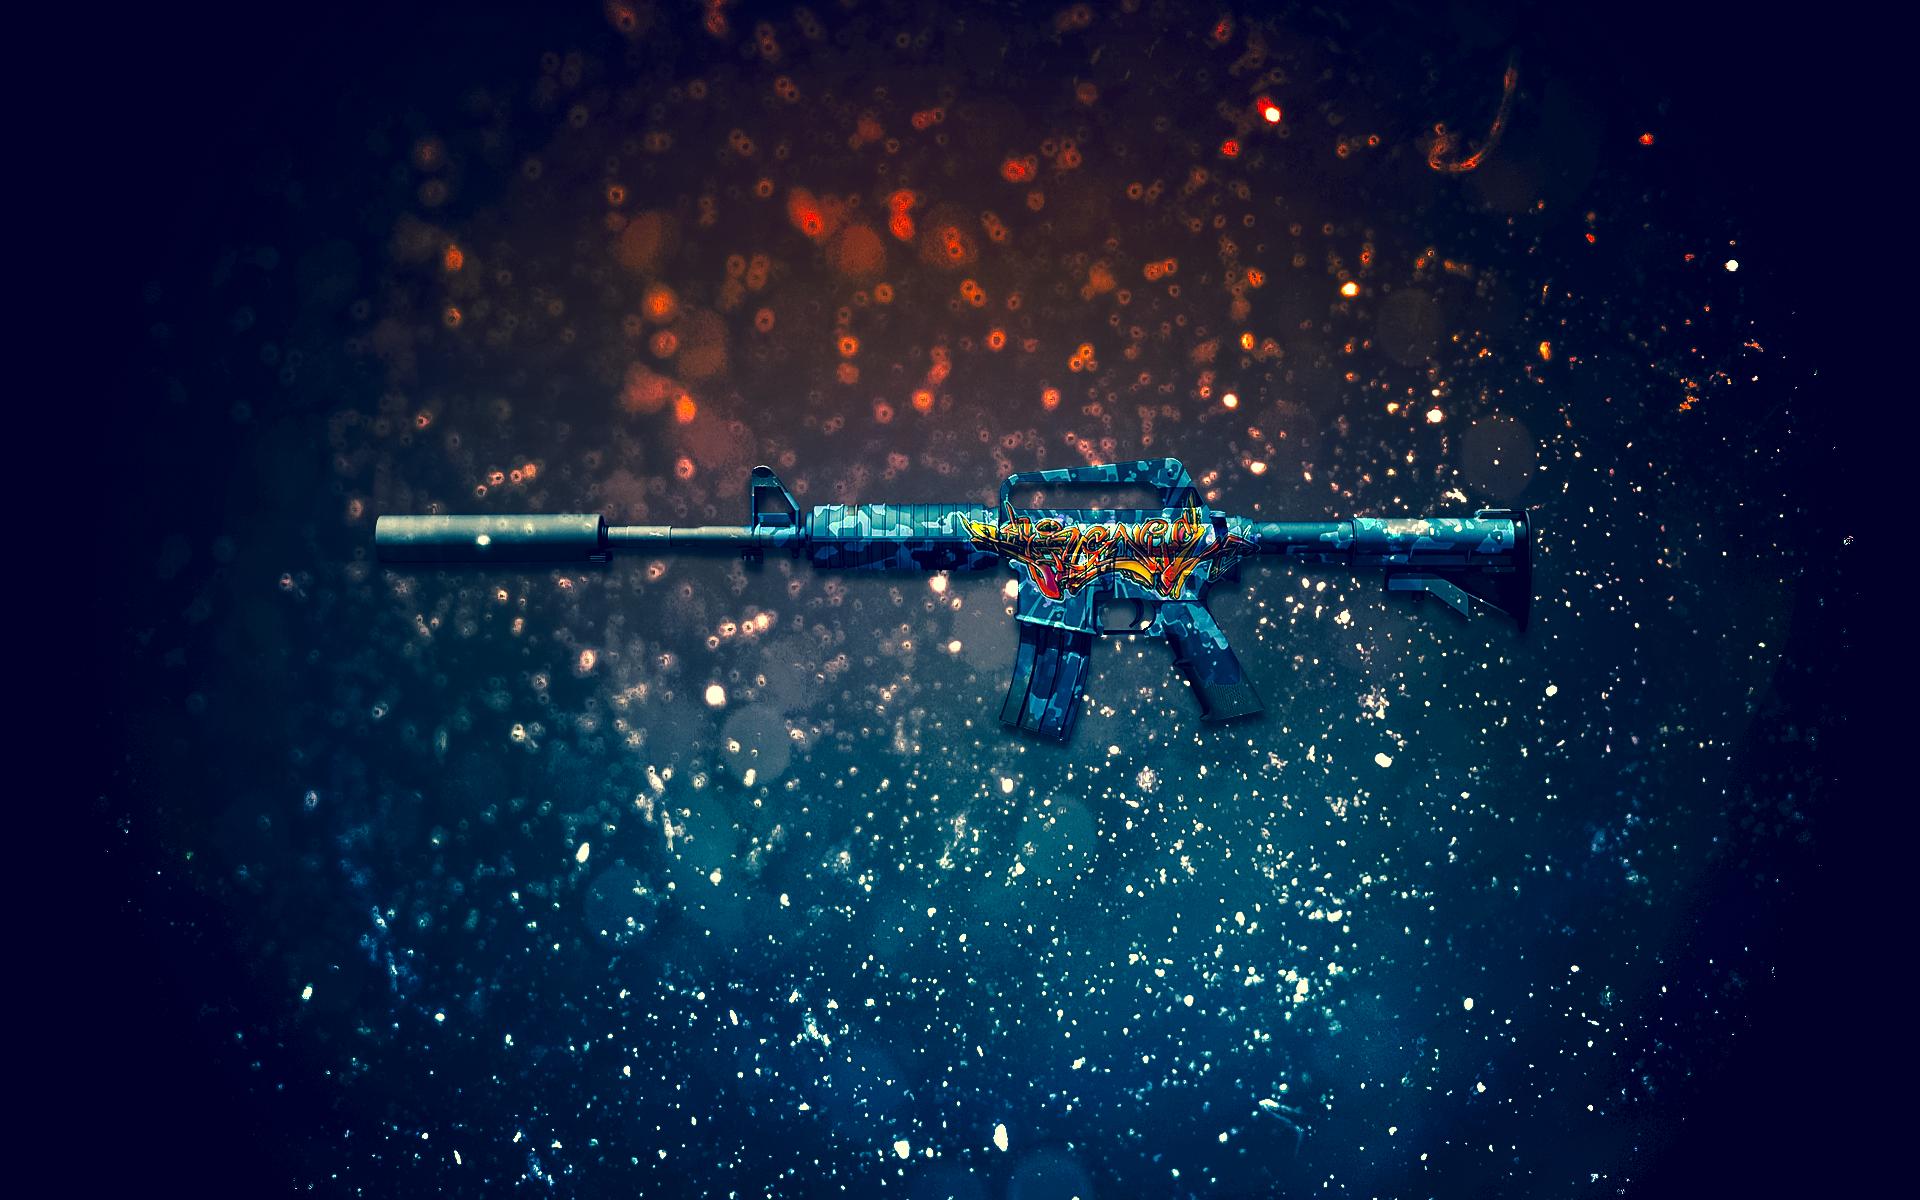 220+ Counter-Strike: Global Offensive HD Wallpapers and Backgrounds